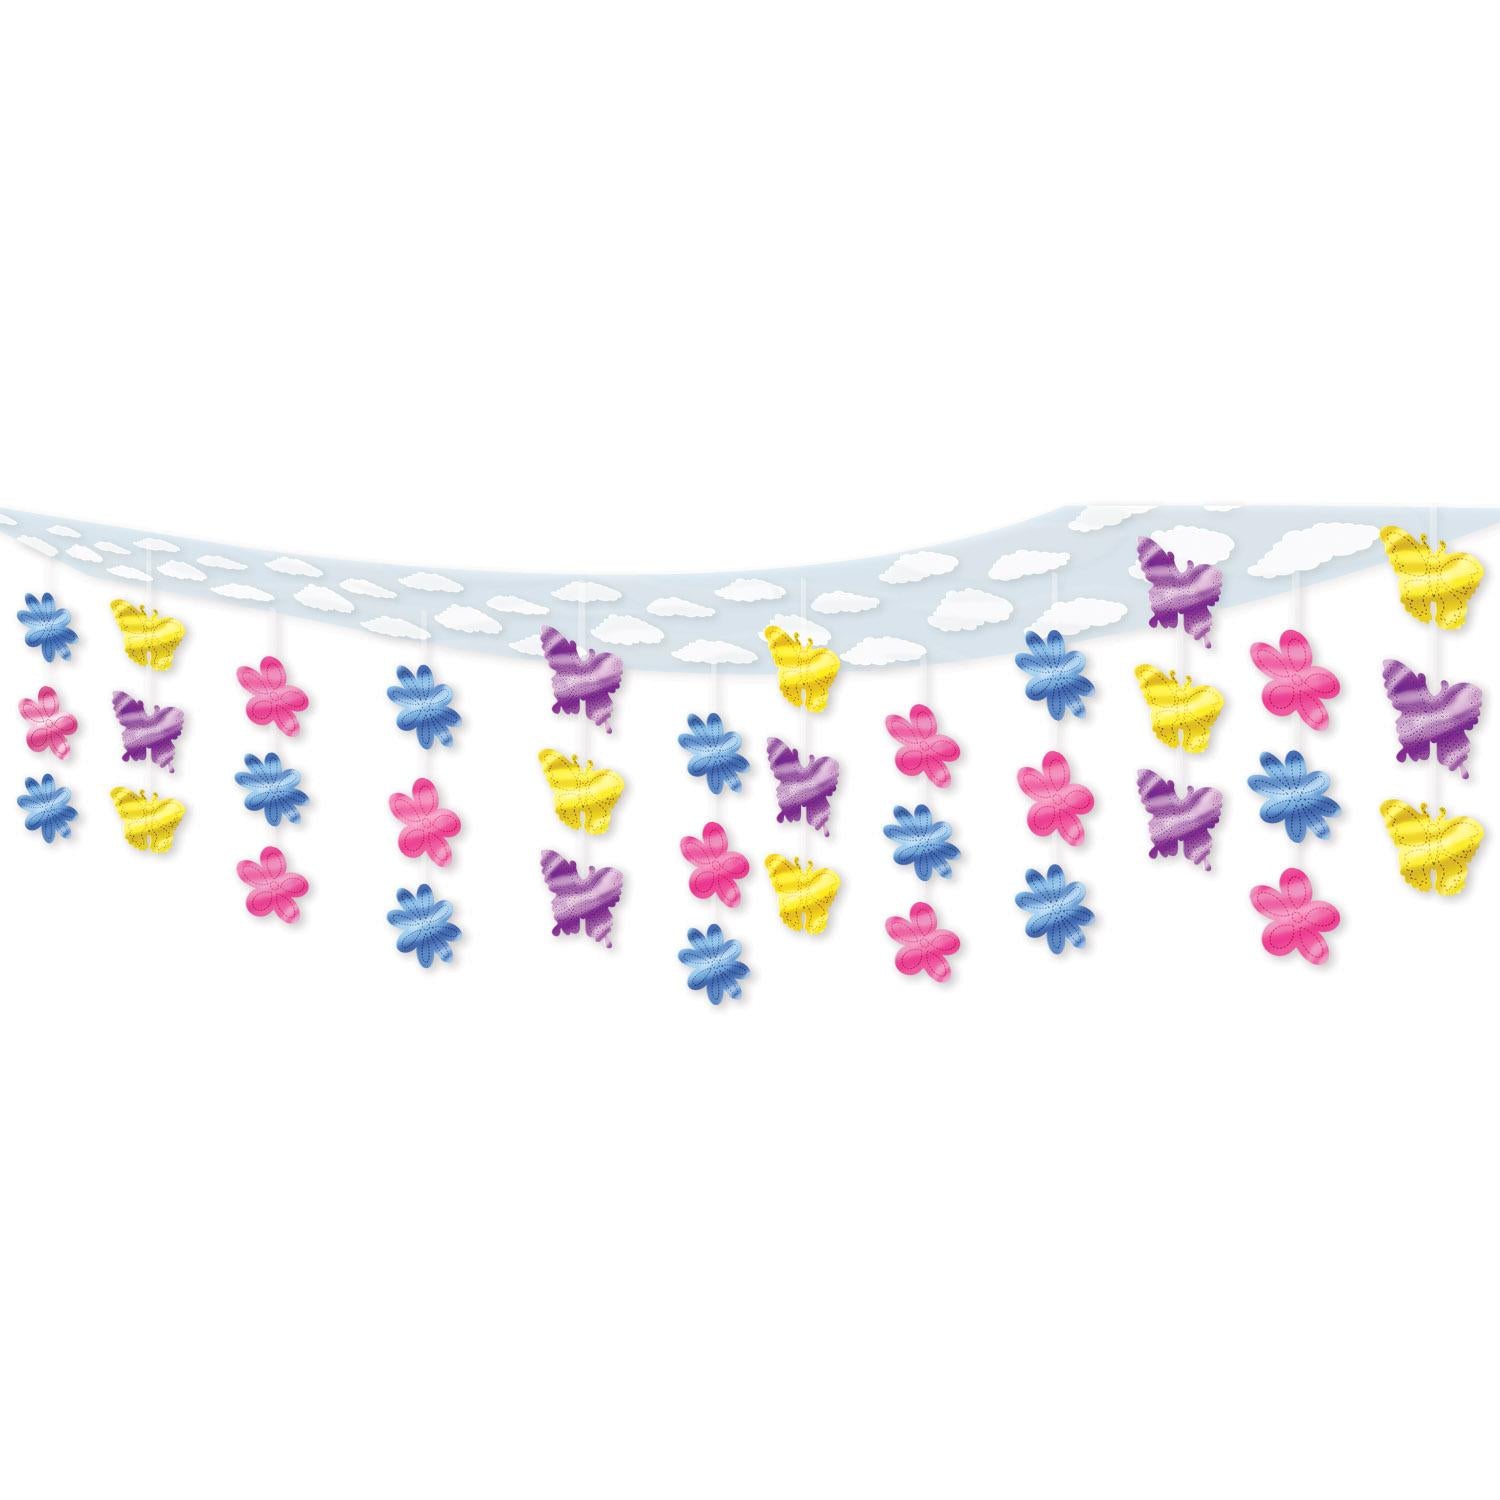 Beistle Butterfly & Flower Ceiling Party Decor